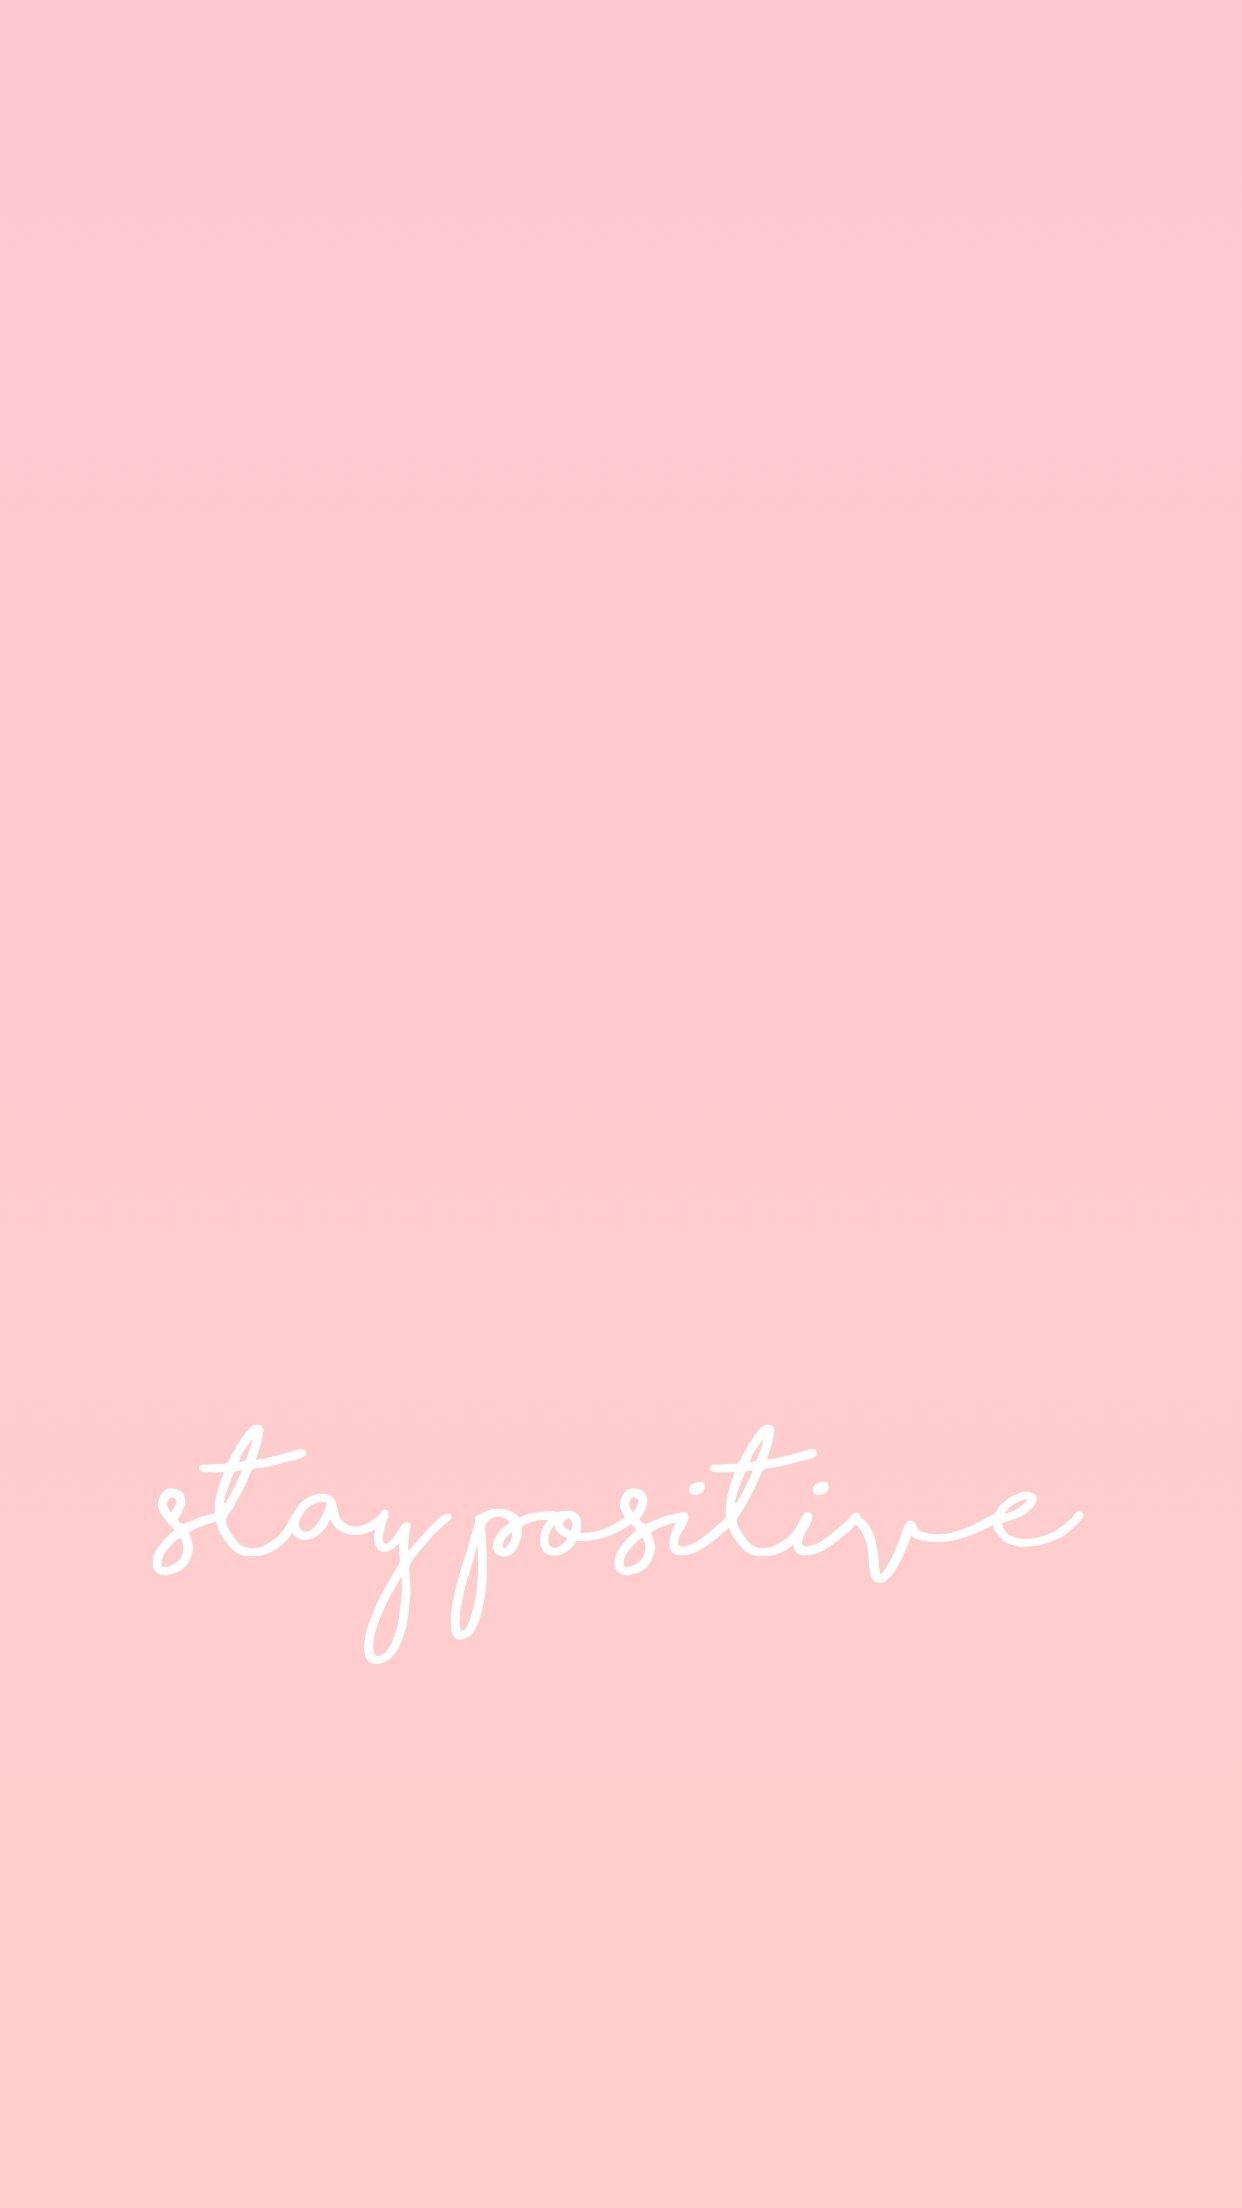 1242x2208 iPhone wallpaper - stay positive // #iphonewallpaper #wallpaper #stay # positive #quote #pink